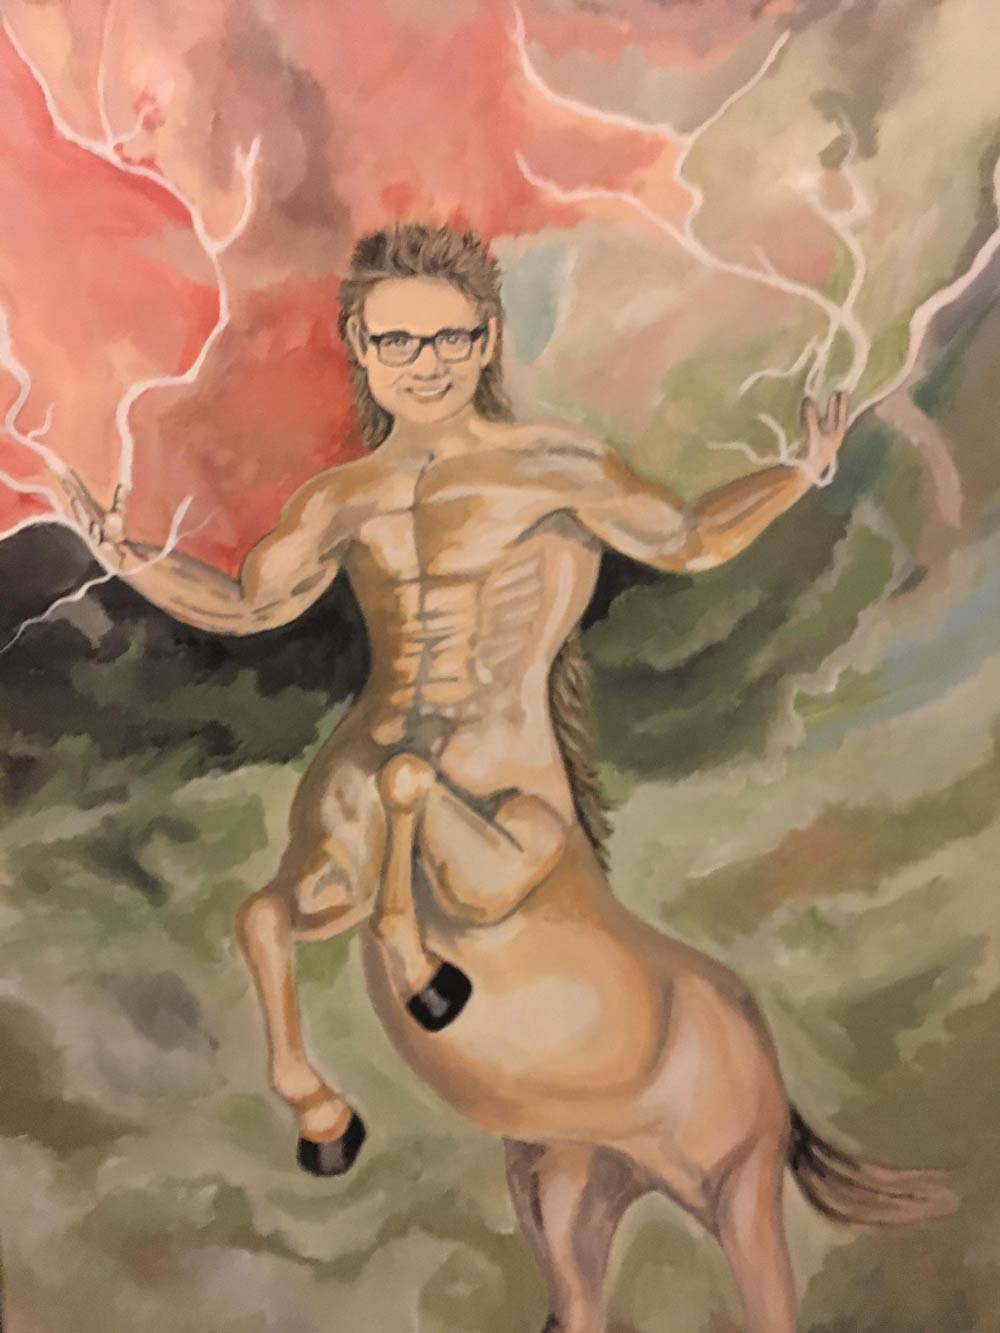 My mom painted me as a centaur for Christmas